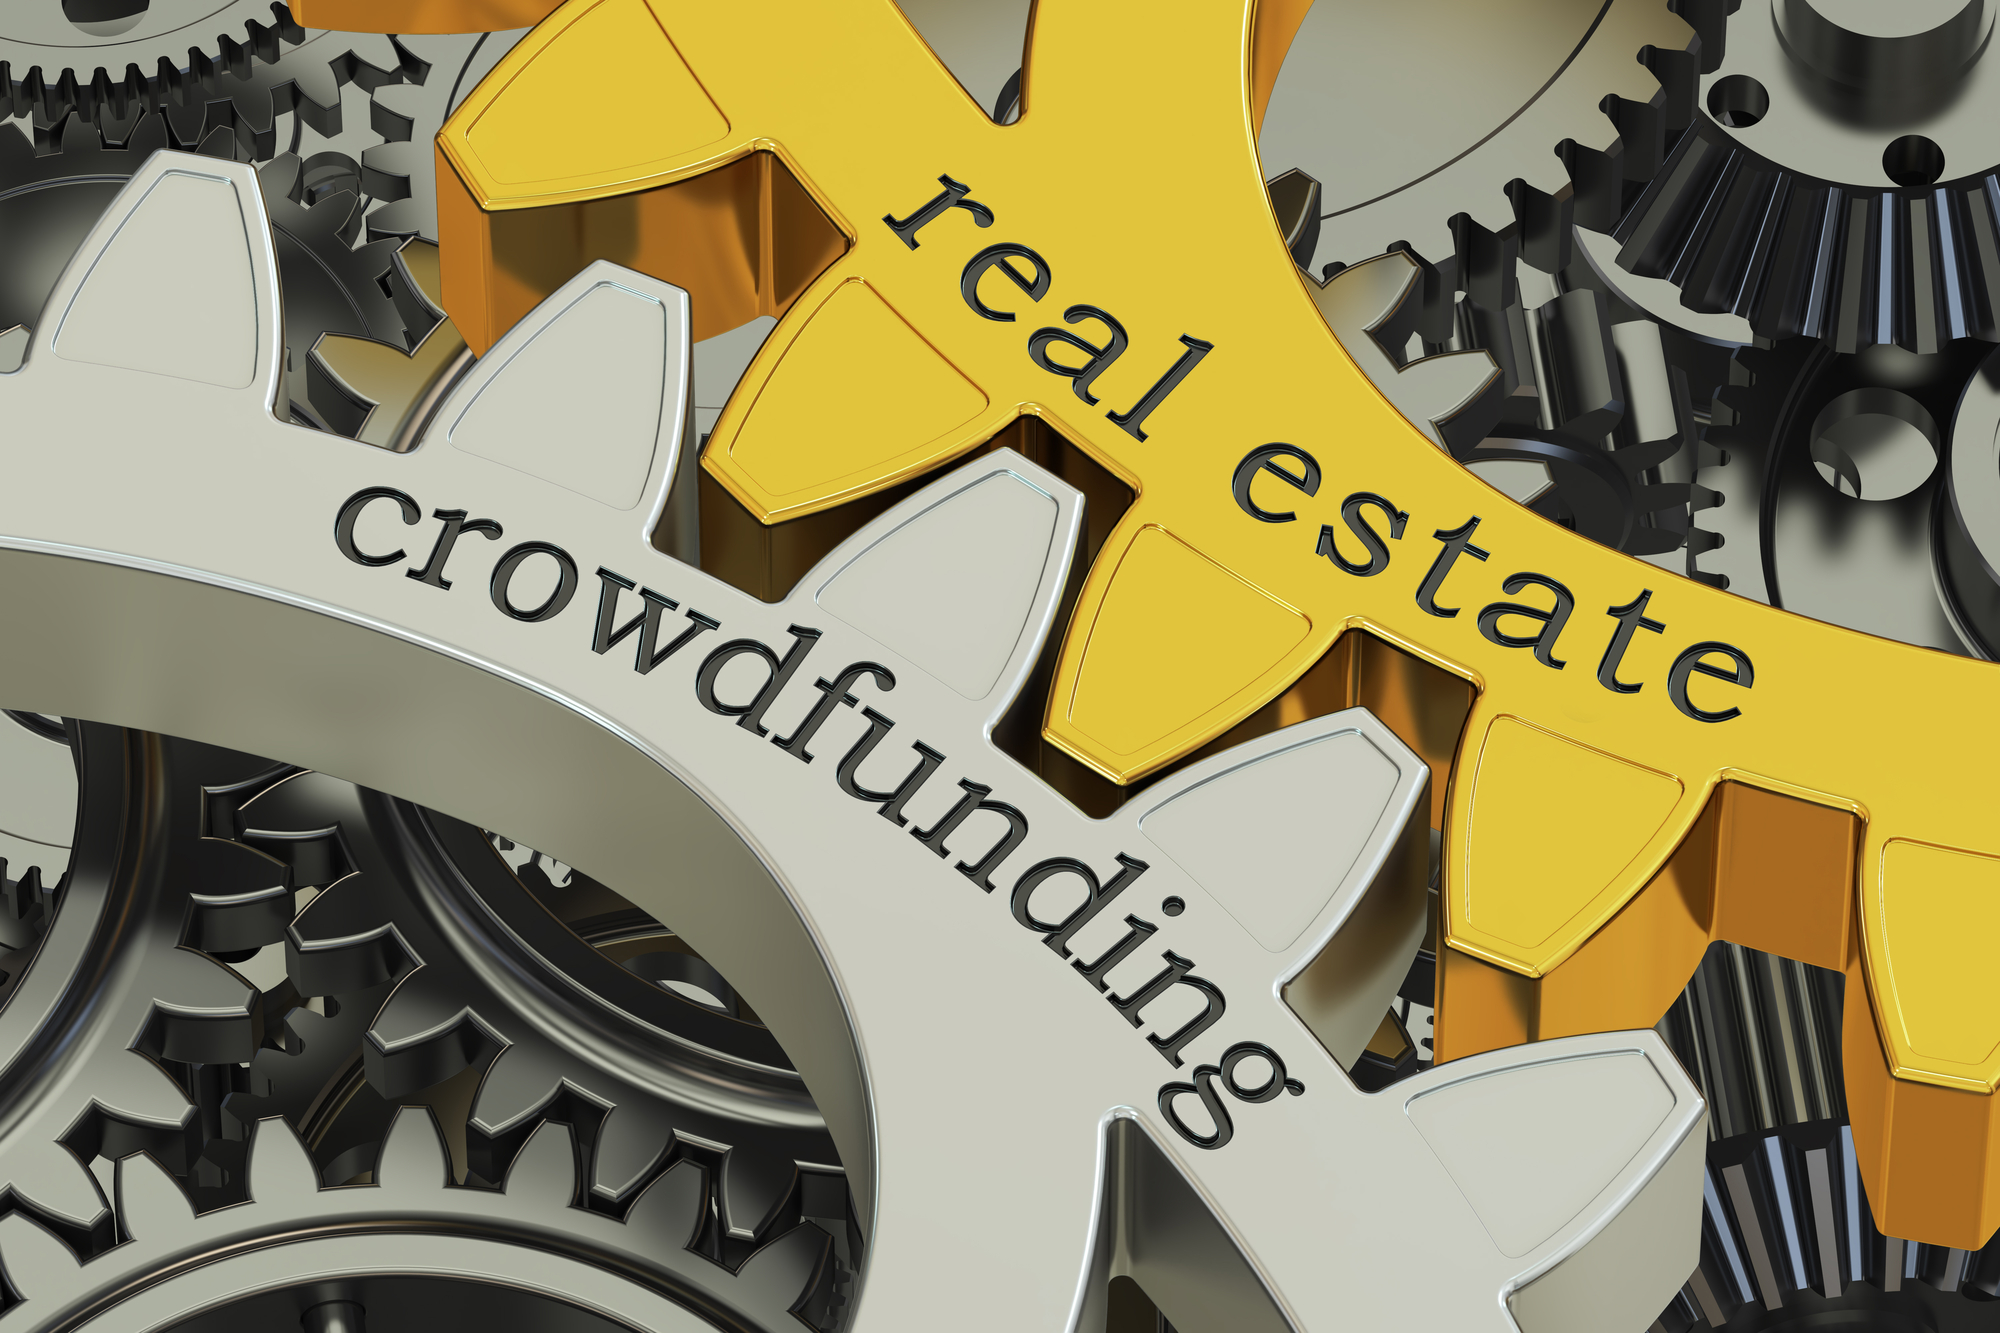 Two gear wheels fitting together. One labeled “real estate,” and the other labeled “crowdfunding.”